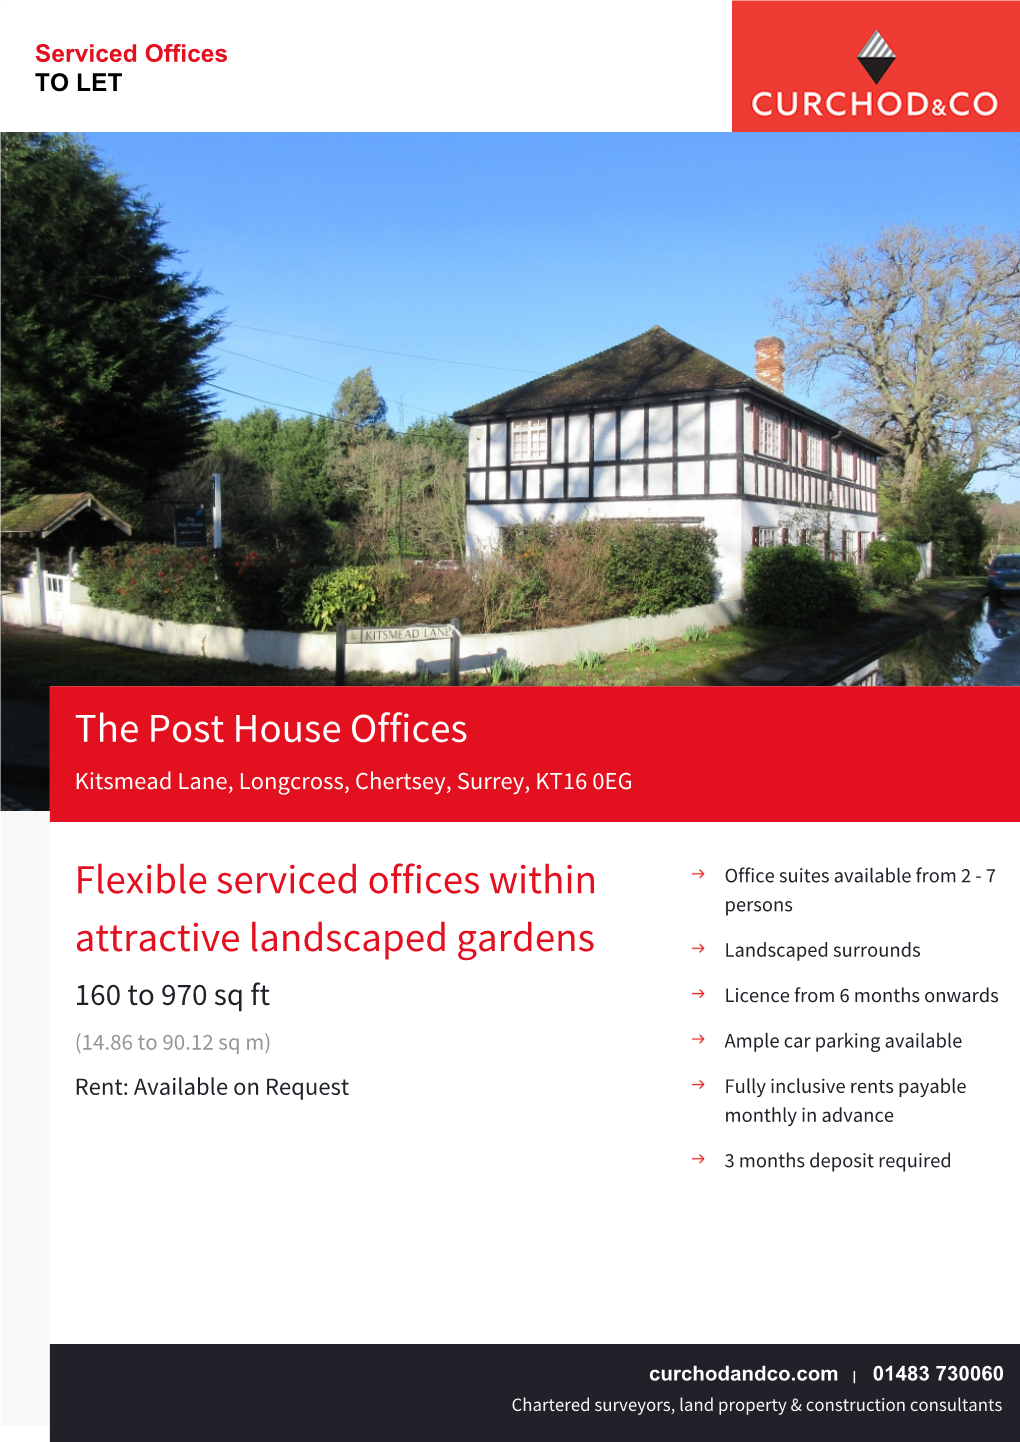 The Post House Offices Flexible Serviced Offices Within Attractive